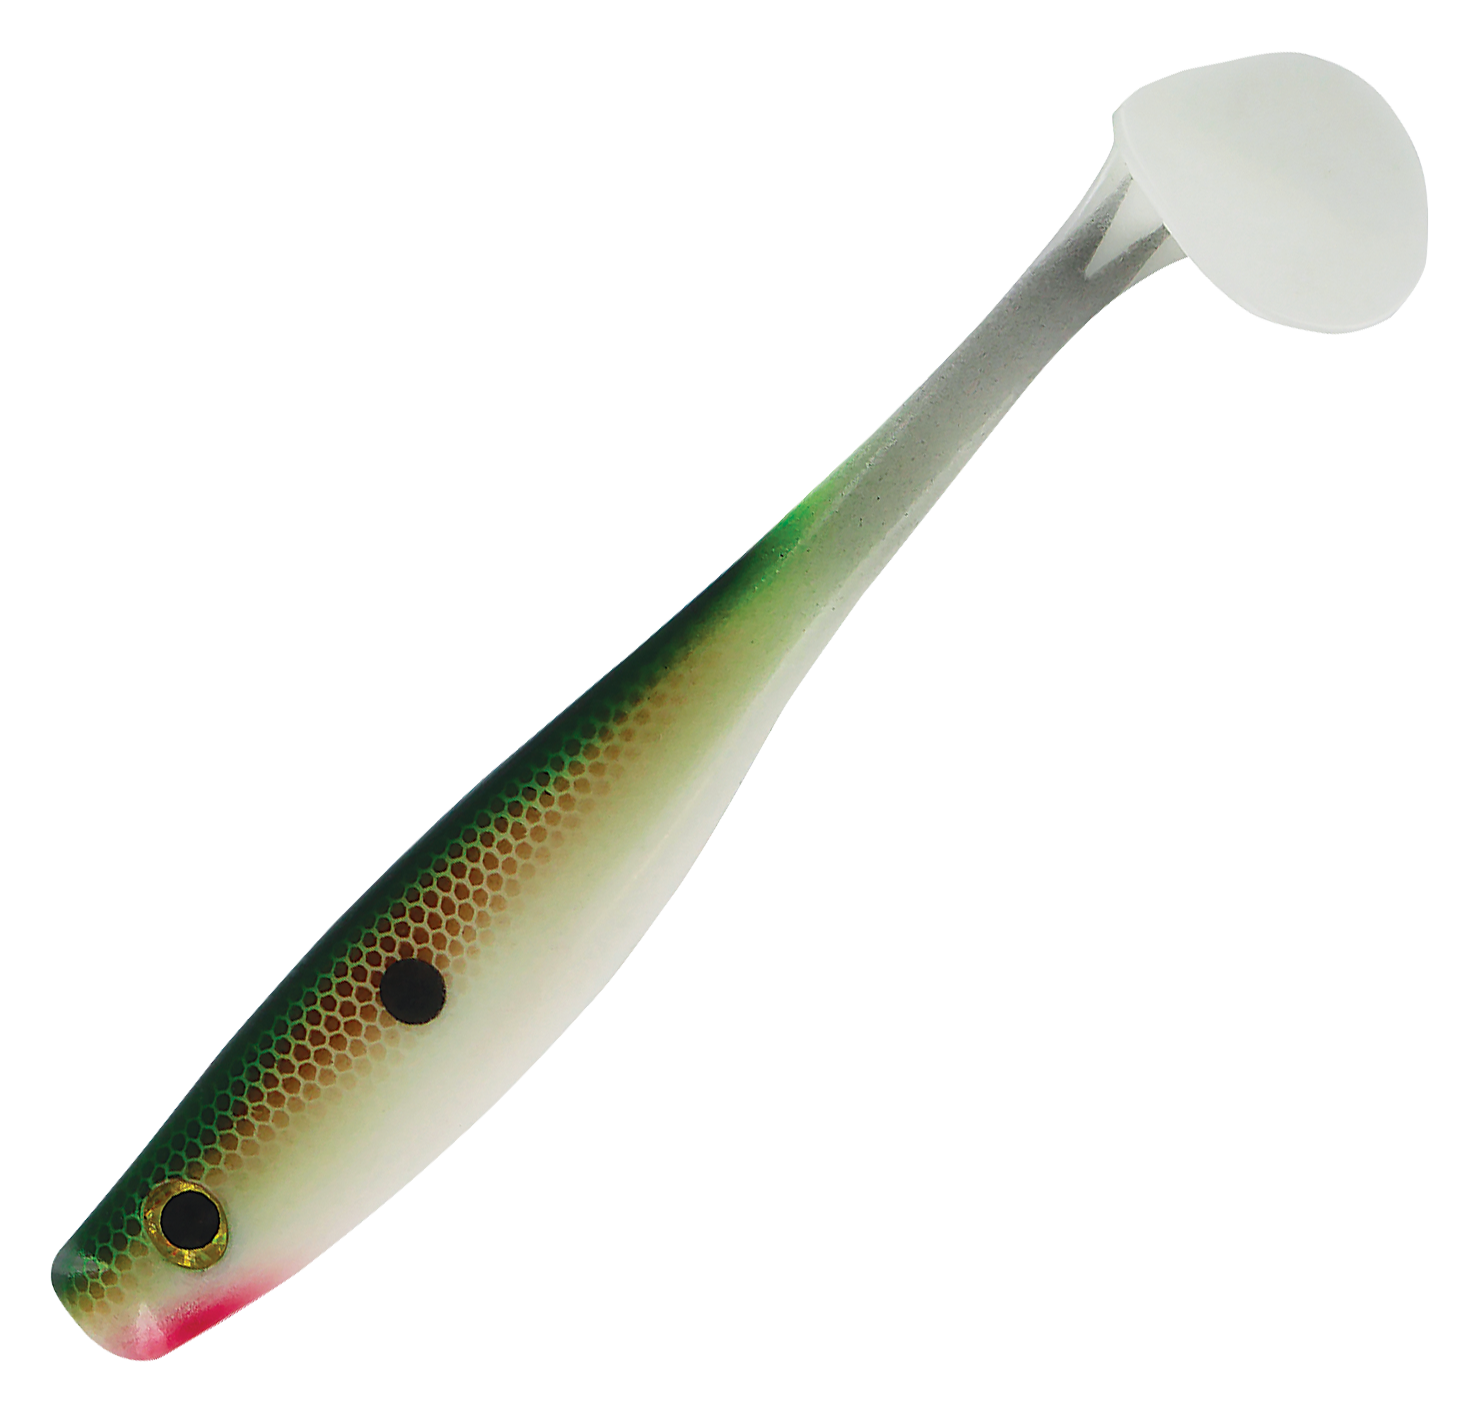 Big Bite Baits Suicide Shad 5 inch Soft Paddle Tail Swimbait (SSGreen) 